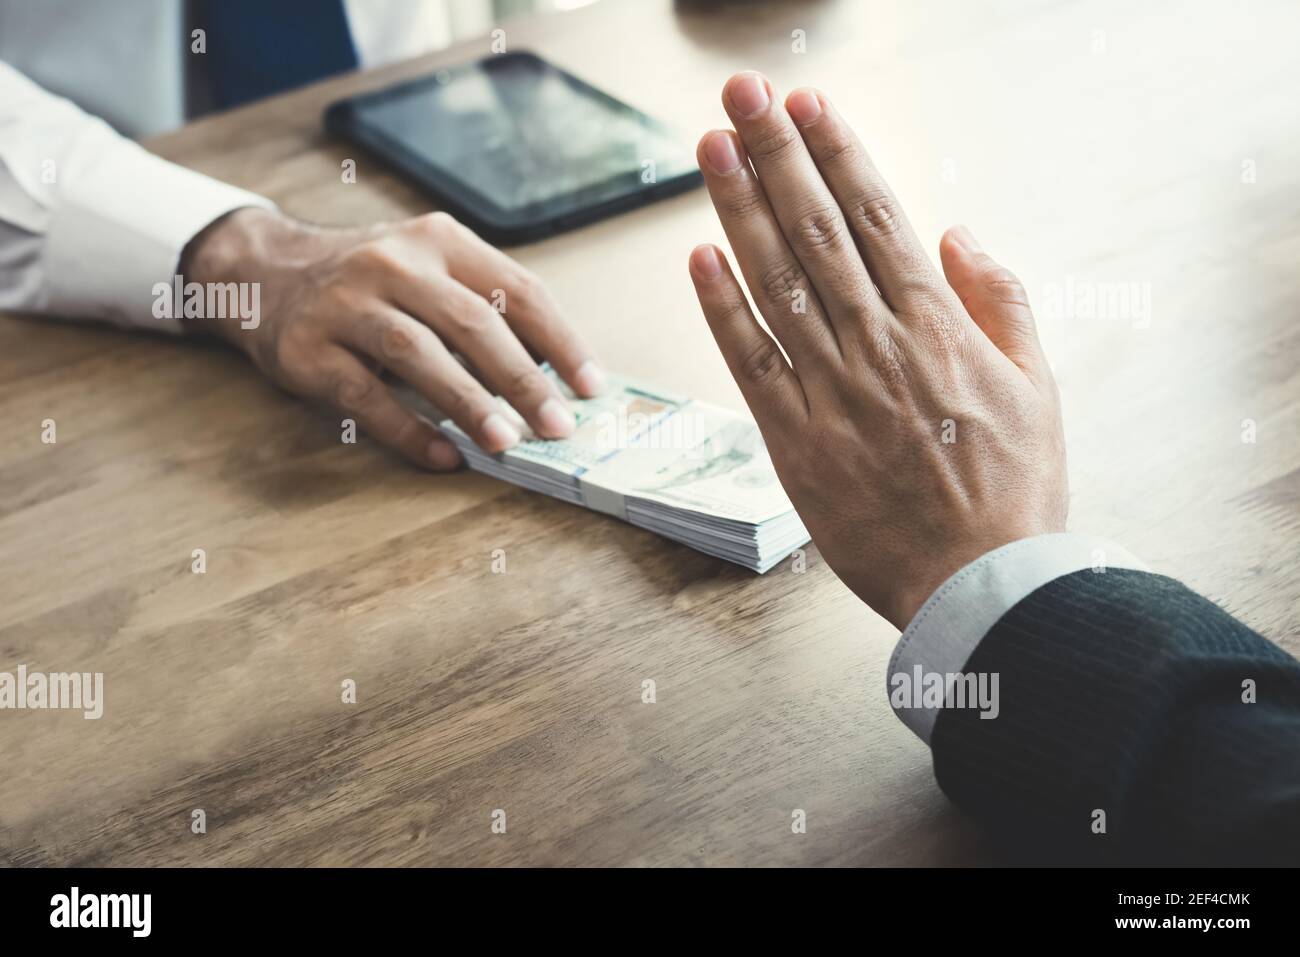 Businessman rejecting money that offered by a man- anti bribery and corruption concept Stock Photo